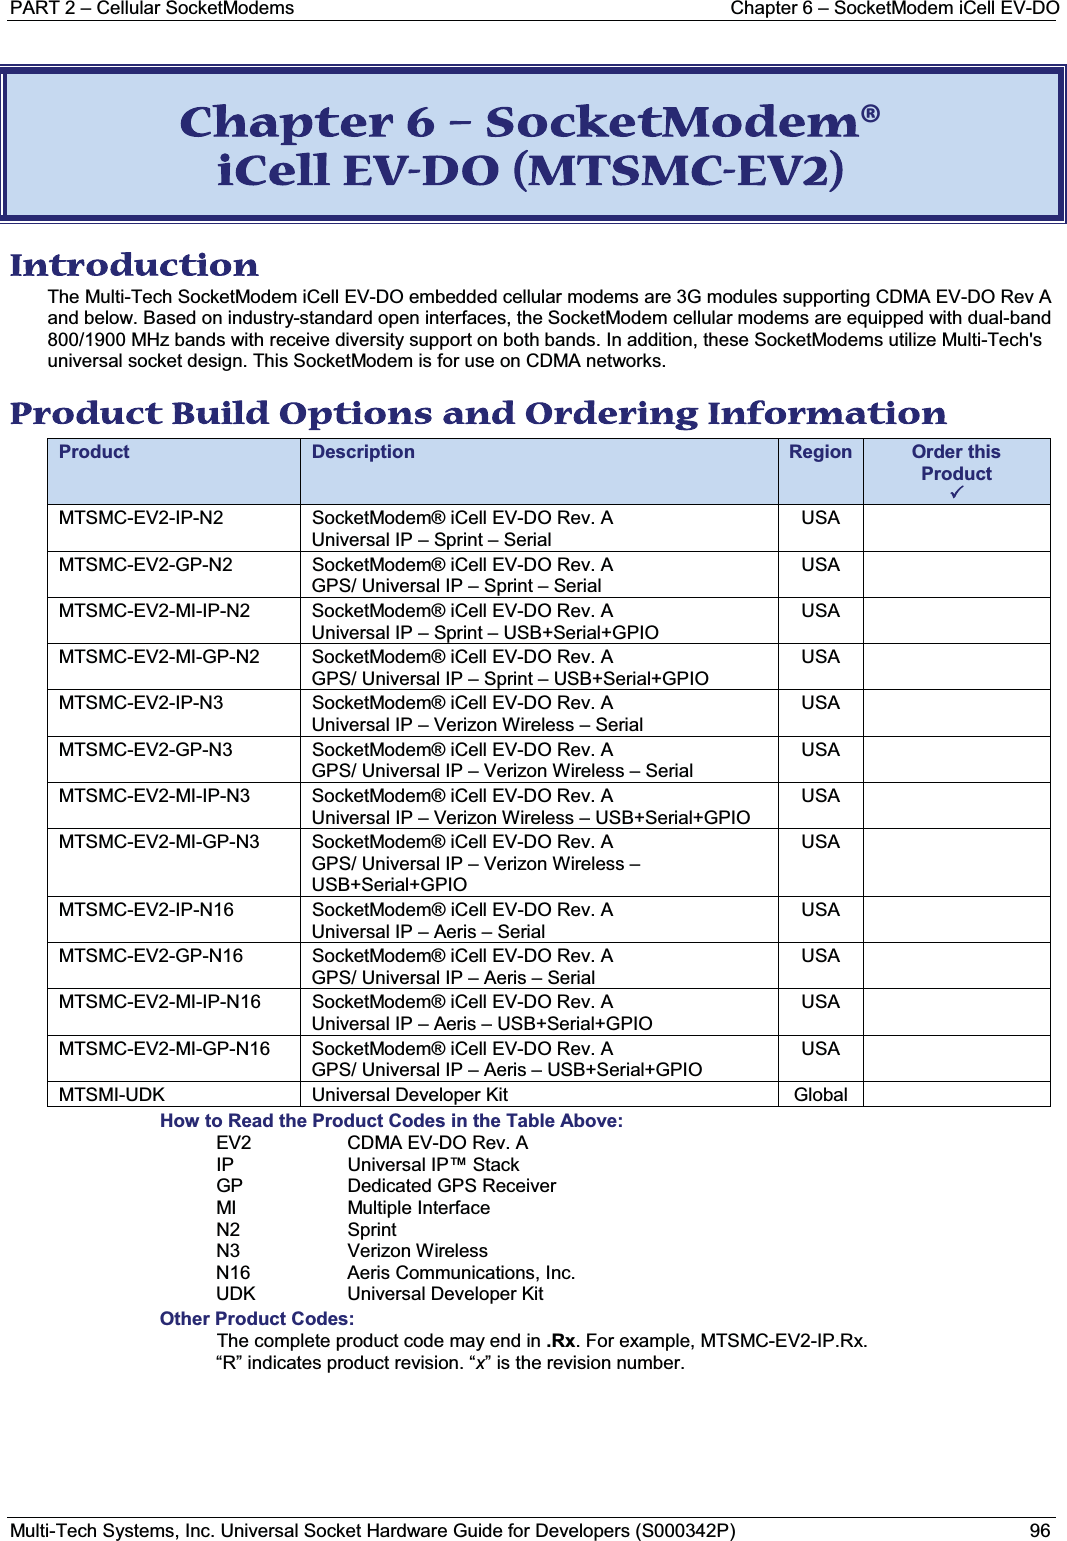 PART 2 – Cellular SocketModems Chapter 6 – SocketModem iCell EV-DOMulti-Tech Systems, Inc. Universal Socket Hardware Guide for Developers (S000342P) 96CChapter 6 – SocketModem® iCell EV-DO (MTSMC-EV2) Introduction The Multi-Tech SocketModem iCell EV-DO embedded cellular modems are 3G modules supporting CDMA EV-DO Rev A and below. Based on industry-standard open interfaces, the SocketModem cellular modems are equipped with dual-band 800/1900 MHz bands with receive diversity support on both bands. In addition, these SocketModems utilize Multi-Tech&apos;s universal socket design. This SocketModem is for use on CDMA networks.Product Build Options and Ordering Information Product Description Region Order this Product3MTSMC-EV2-IP-N2 SocketModem® iCell EV-DO Rev. AUniversal IP – Sprint – SerialUSAMTSMC-EV2-GP-N2 SocketModem® iCell EV-DO Rev. AGPS/ Universal IP – Sprint – SerialUSAMTSMC-EV2-MI-IP-N2 SocketModem® iCell EV-DO Rev. AUniversal IP – Sprint – USB+Serial+GPIOUSAMTSMC-EV2-MI-GP-N2 SocketModem® iCell EV-DO Rev. AGPS/ Universal IP – Sprint – USB+Serial+GPIOUSAMTSMC-EV2-IP-N3 SocketModem® iCell EV-DO Rev. AUniversal IP – Verizon Wireless – SerialUSAMTSMC-EV2-GP-N3 SocketModem® iCell EV-DO Rev. AGPS/ Universal IP – Verizon Wireless – SerialUSAMTSMC-EV2-MI-IP-N3 SocketModem® iCell EV-DO Rev. AUniversal IP – Verizon Wireless – USB+Serial+GPIOUSAMTSMC-EV2-MI-GP-N3 SocketModem® iCell EV-DO Rev. AGPS/ Universal IP – Verizon Wireless –USB+Serial+GPIOUSAMTSMC-EV2-IP-N16 SocketModem® iCell EV-DO Rev. AUniversal IP – Aeris – SerialUSAMTSMC-EV2-GP-N16 SocketModem® iCell EV-DO Rev. AGPS/ Universal IP – Aeris – SerialUSAMTSMC-EV2-MI-IP-N16 SocketModem® iCell EV-DO Rev. AUniversal IP – Aeris – USB+Serial+GPIOUSAMTSMC-EV2-MI-GP-N16 SocketModem® iCell EV-DO Rev. AGPS/ Universal IP – Aeris – USB+Serial+GPIOUSAMTSMI-UDK Universal Developer Kit GlobalHow to Read the Product Codes in the Table Above:EV2 CDMA EV-DO Rev. AIP Universal IP™ StackGP Dedicated GPS ReceiverMI Multiple InterfaceN2 SprintN3 Verizon WirelessN16 Aeris Communications, Inc.UDK Universal Developer KitOther Product Codes:The complete product code may end in .Rx. For example, MTSMC-EV2-IP.Rx.“R” indicates product revision. “x” is the revision number.